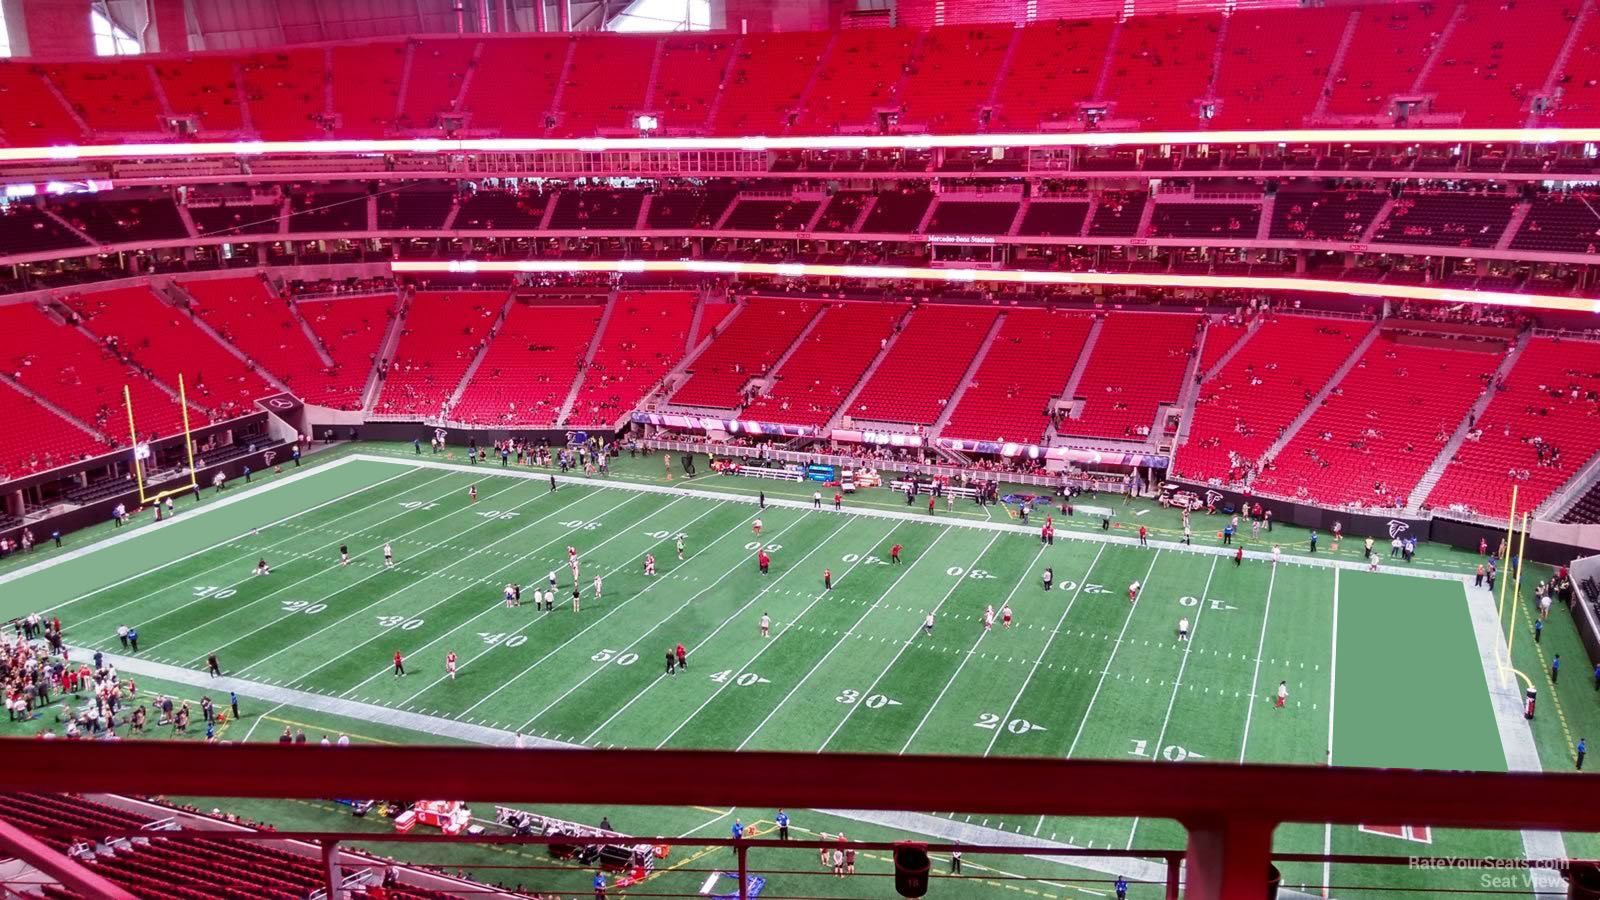 section 308, row 4 seat view  for football - mercedes-benz stadium